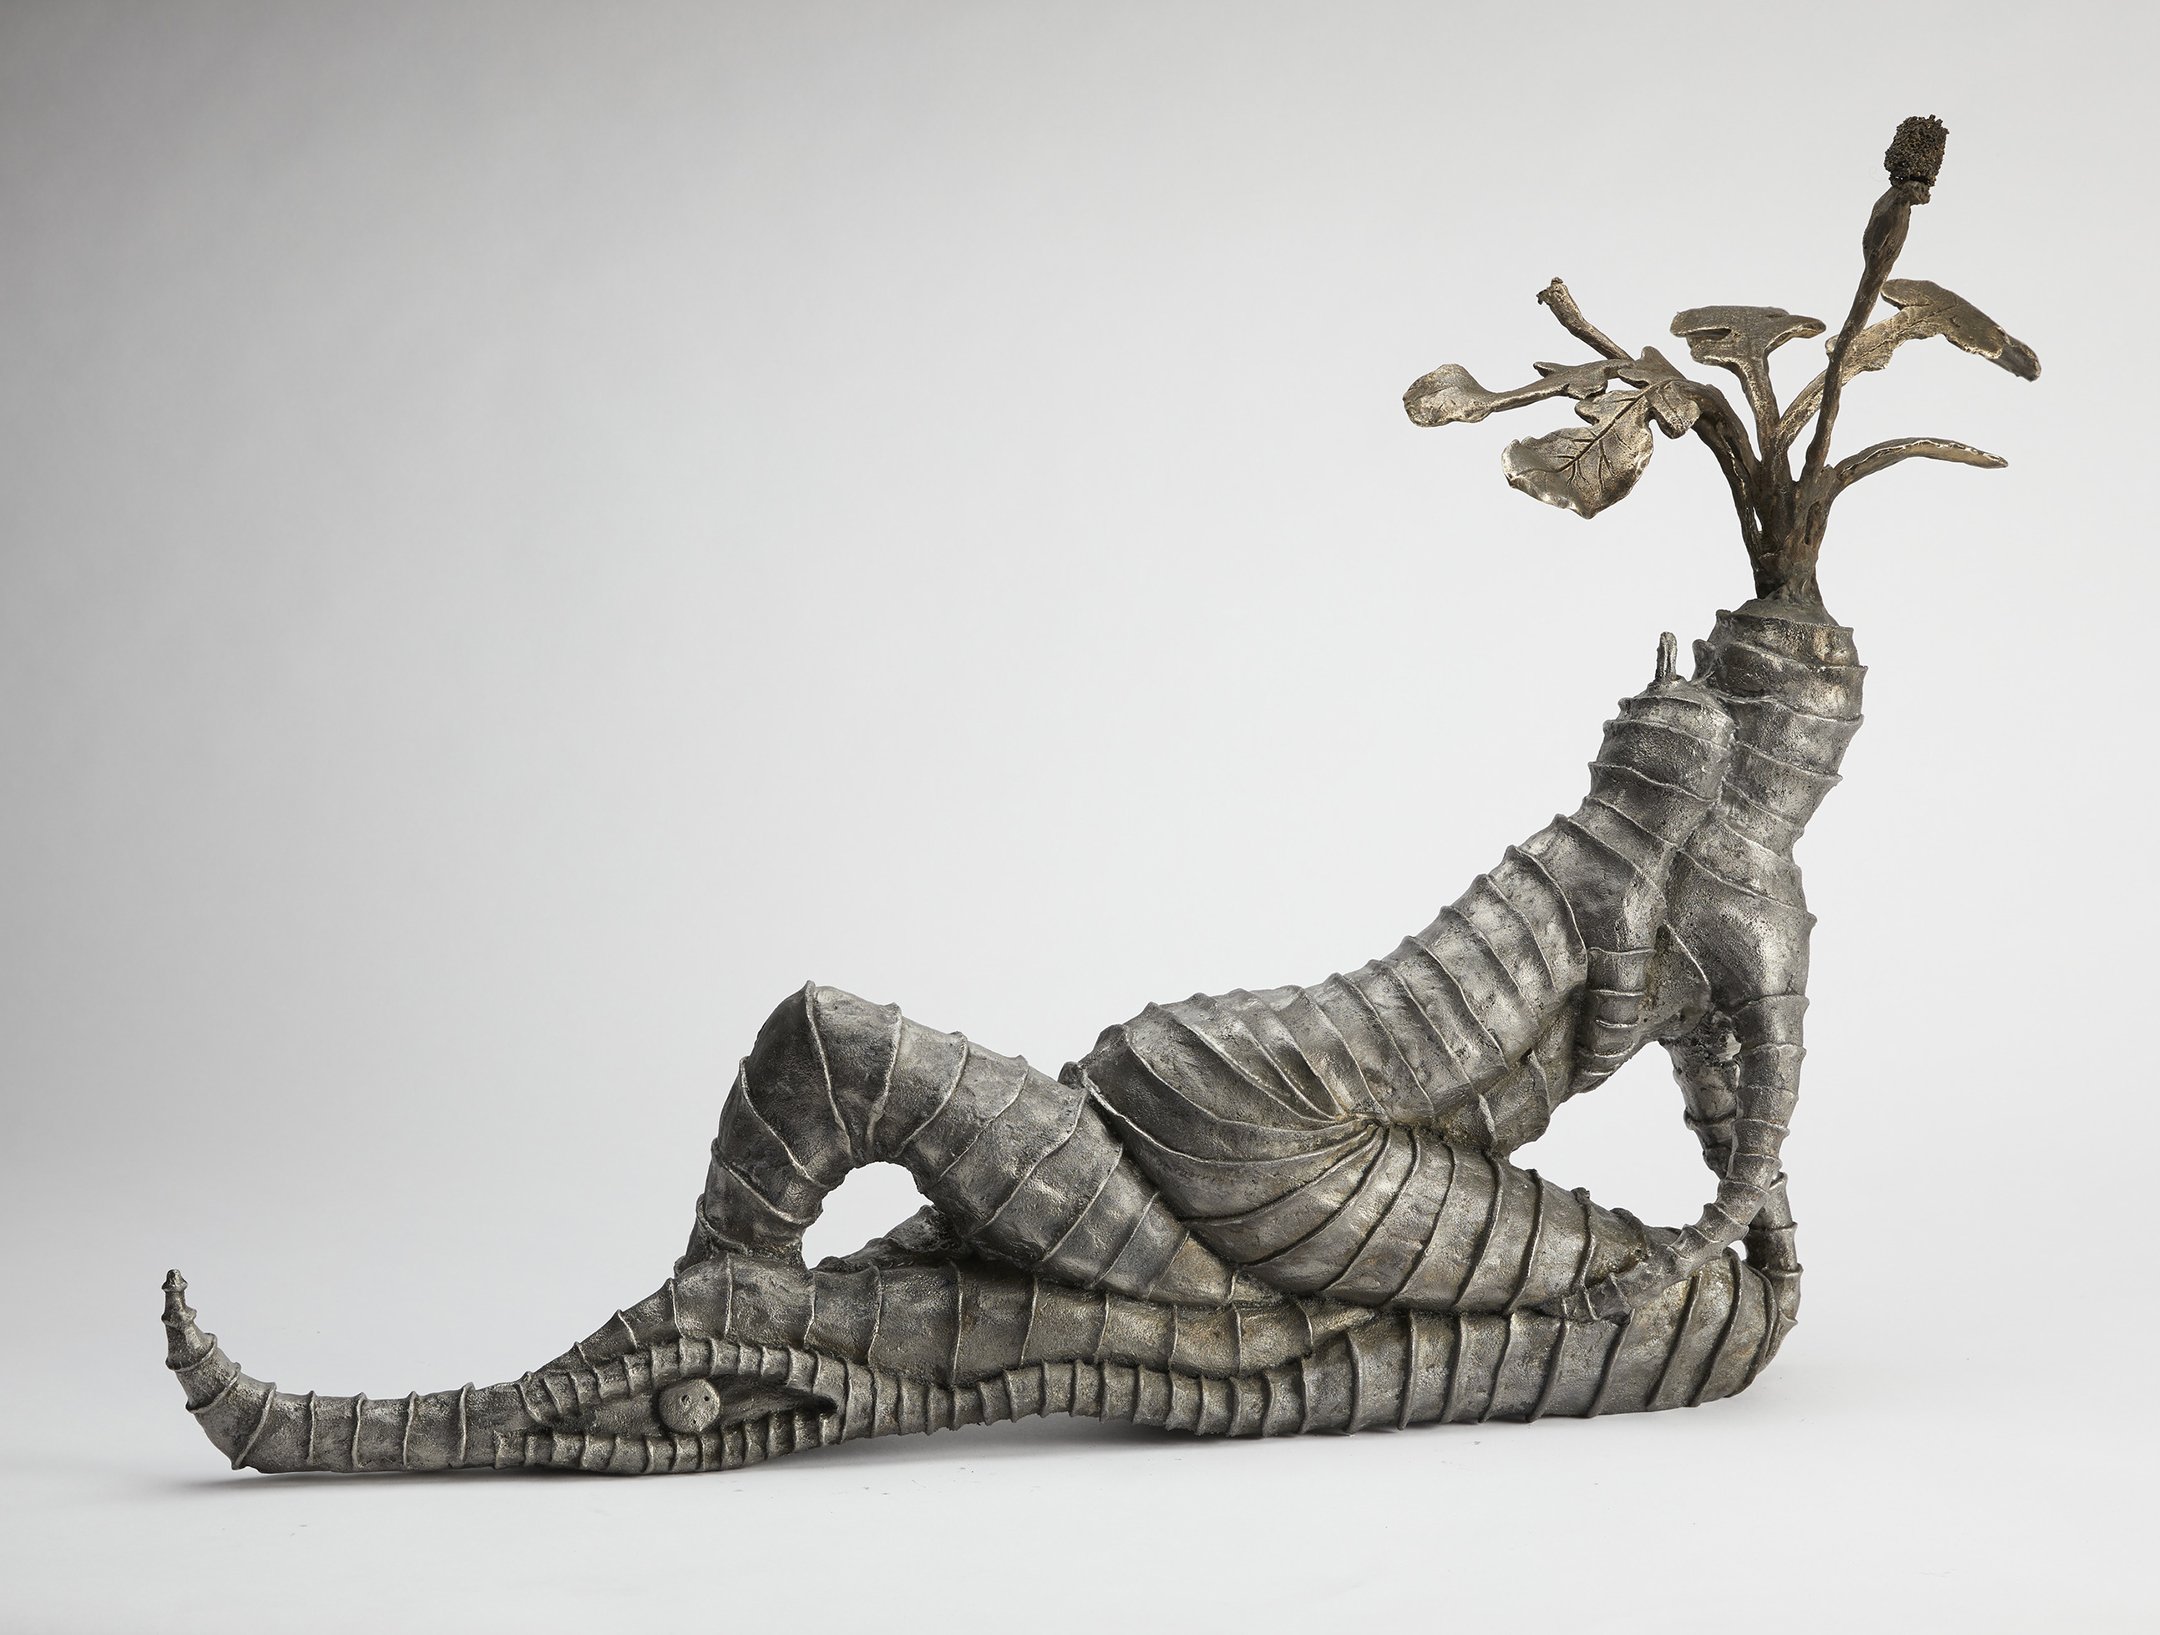  Grown Together (Thistle), 2020. Cast iron and brass, 23.5 x 32 x 13.5 inches (59.1 x 81.3 x 34.3 cm) 